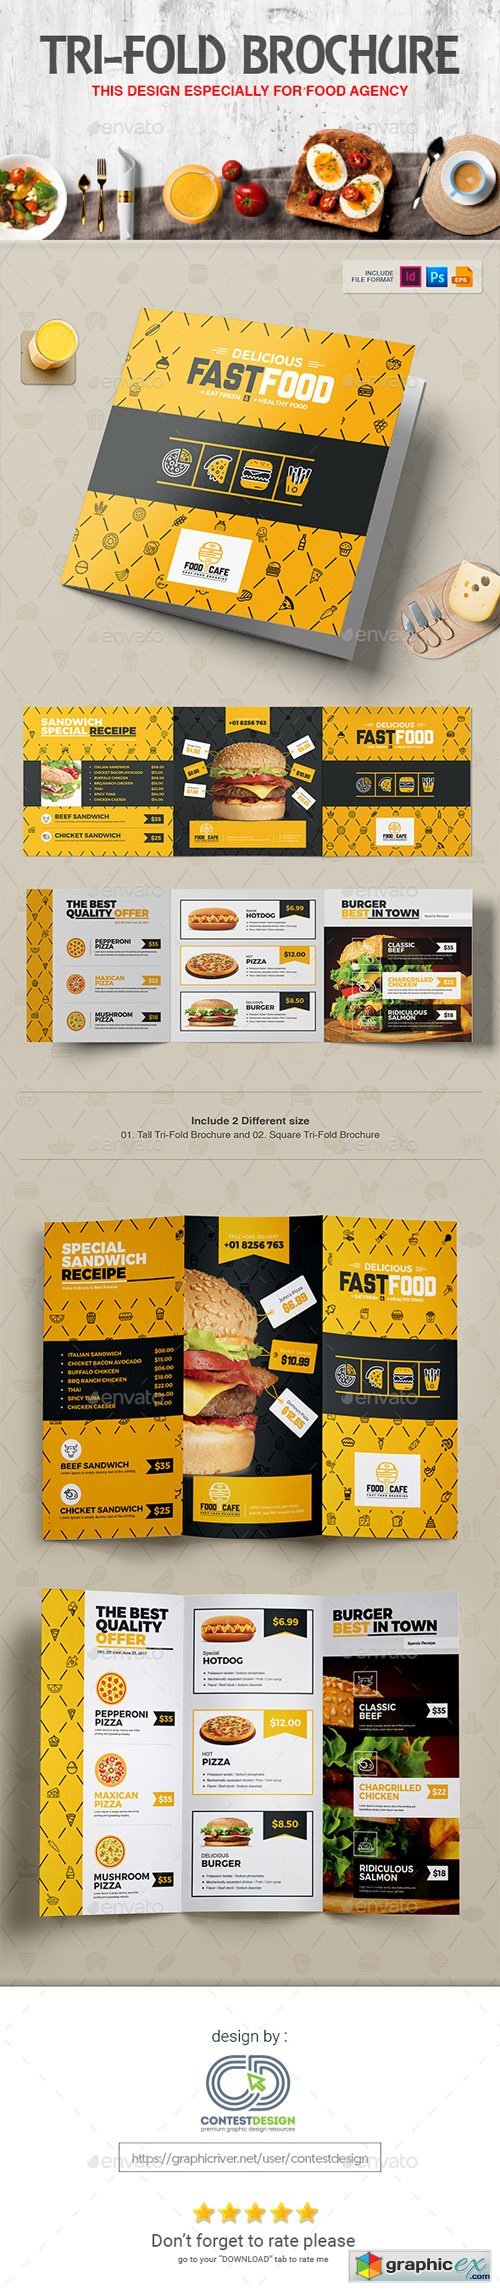 Tri-Fold Brochure (Square & Tall) Design Template for Fast Food / Restaurants / Cafe